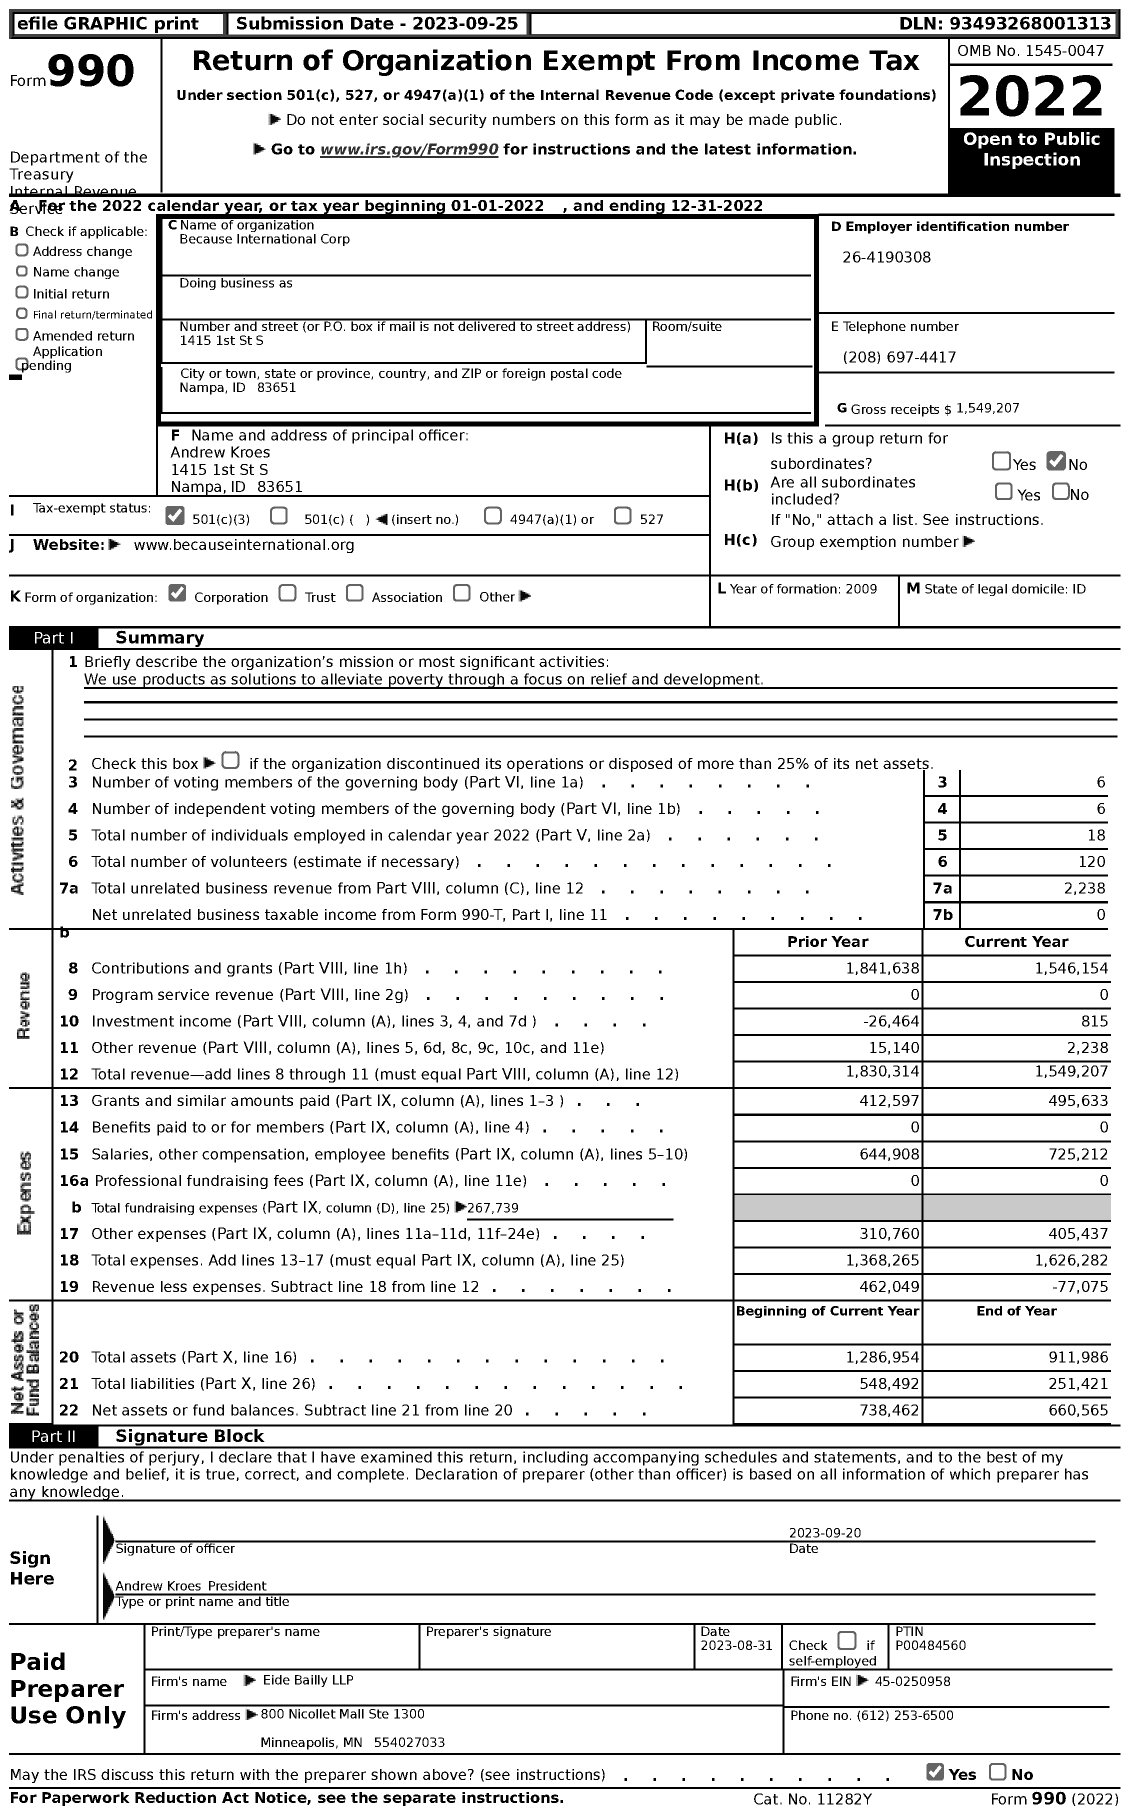 Image of first page of 2022 Form 990 for Because International Corp